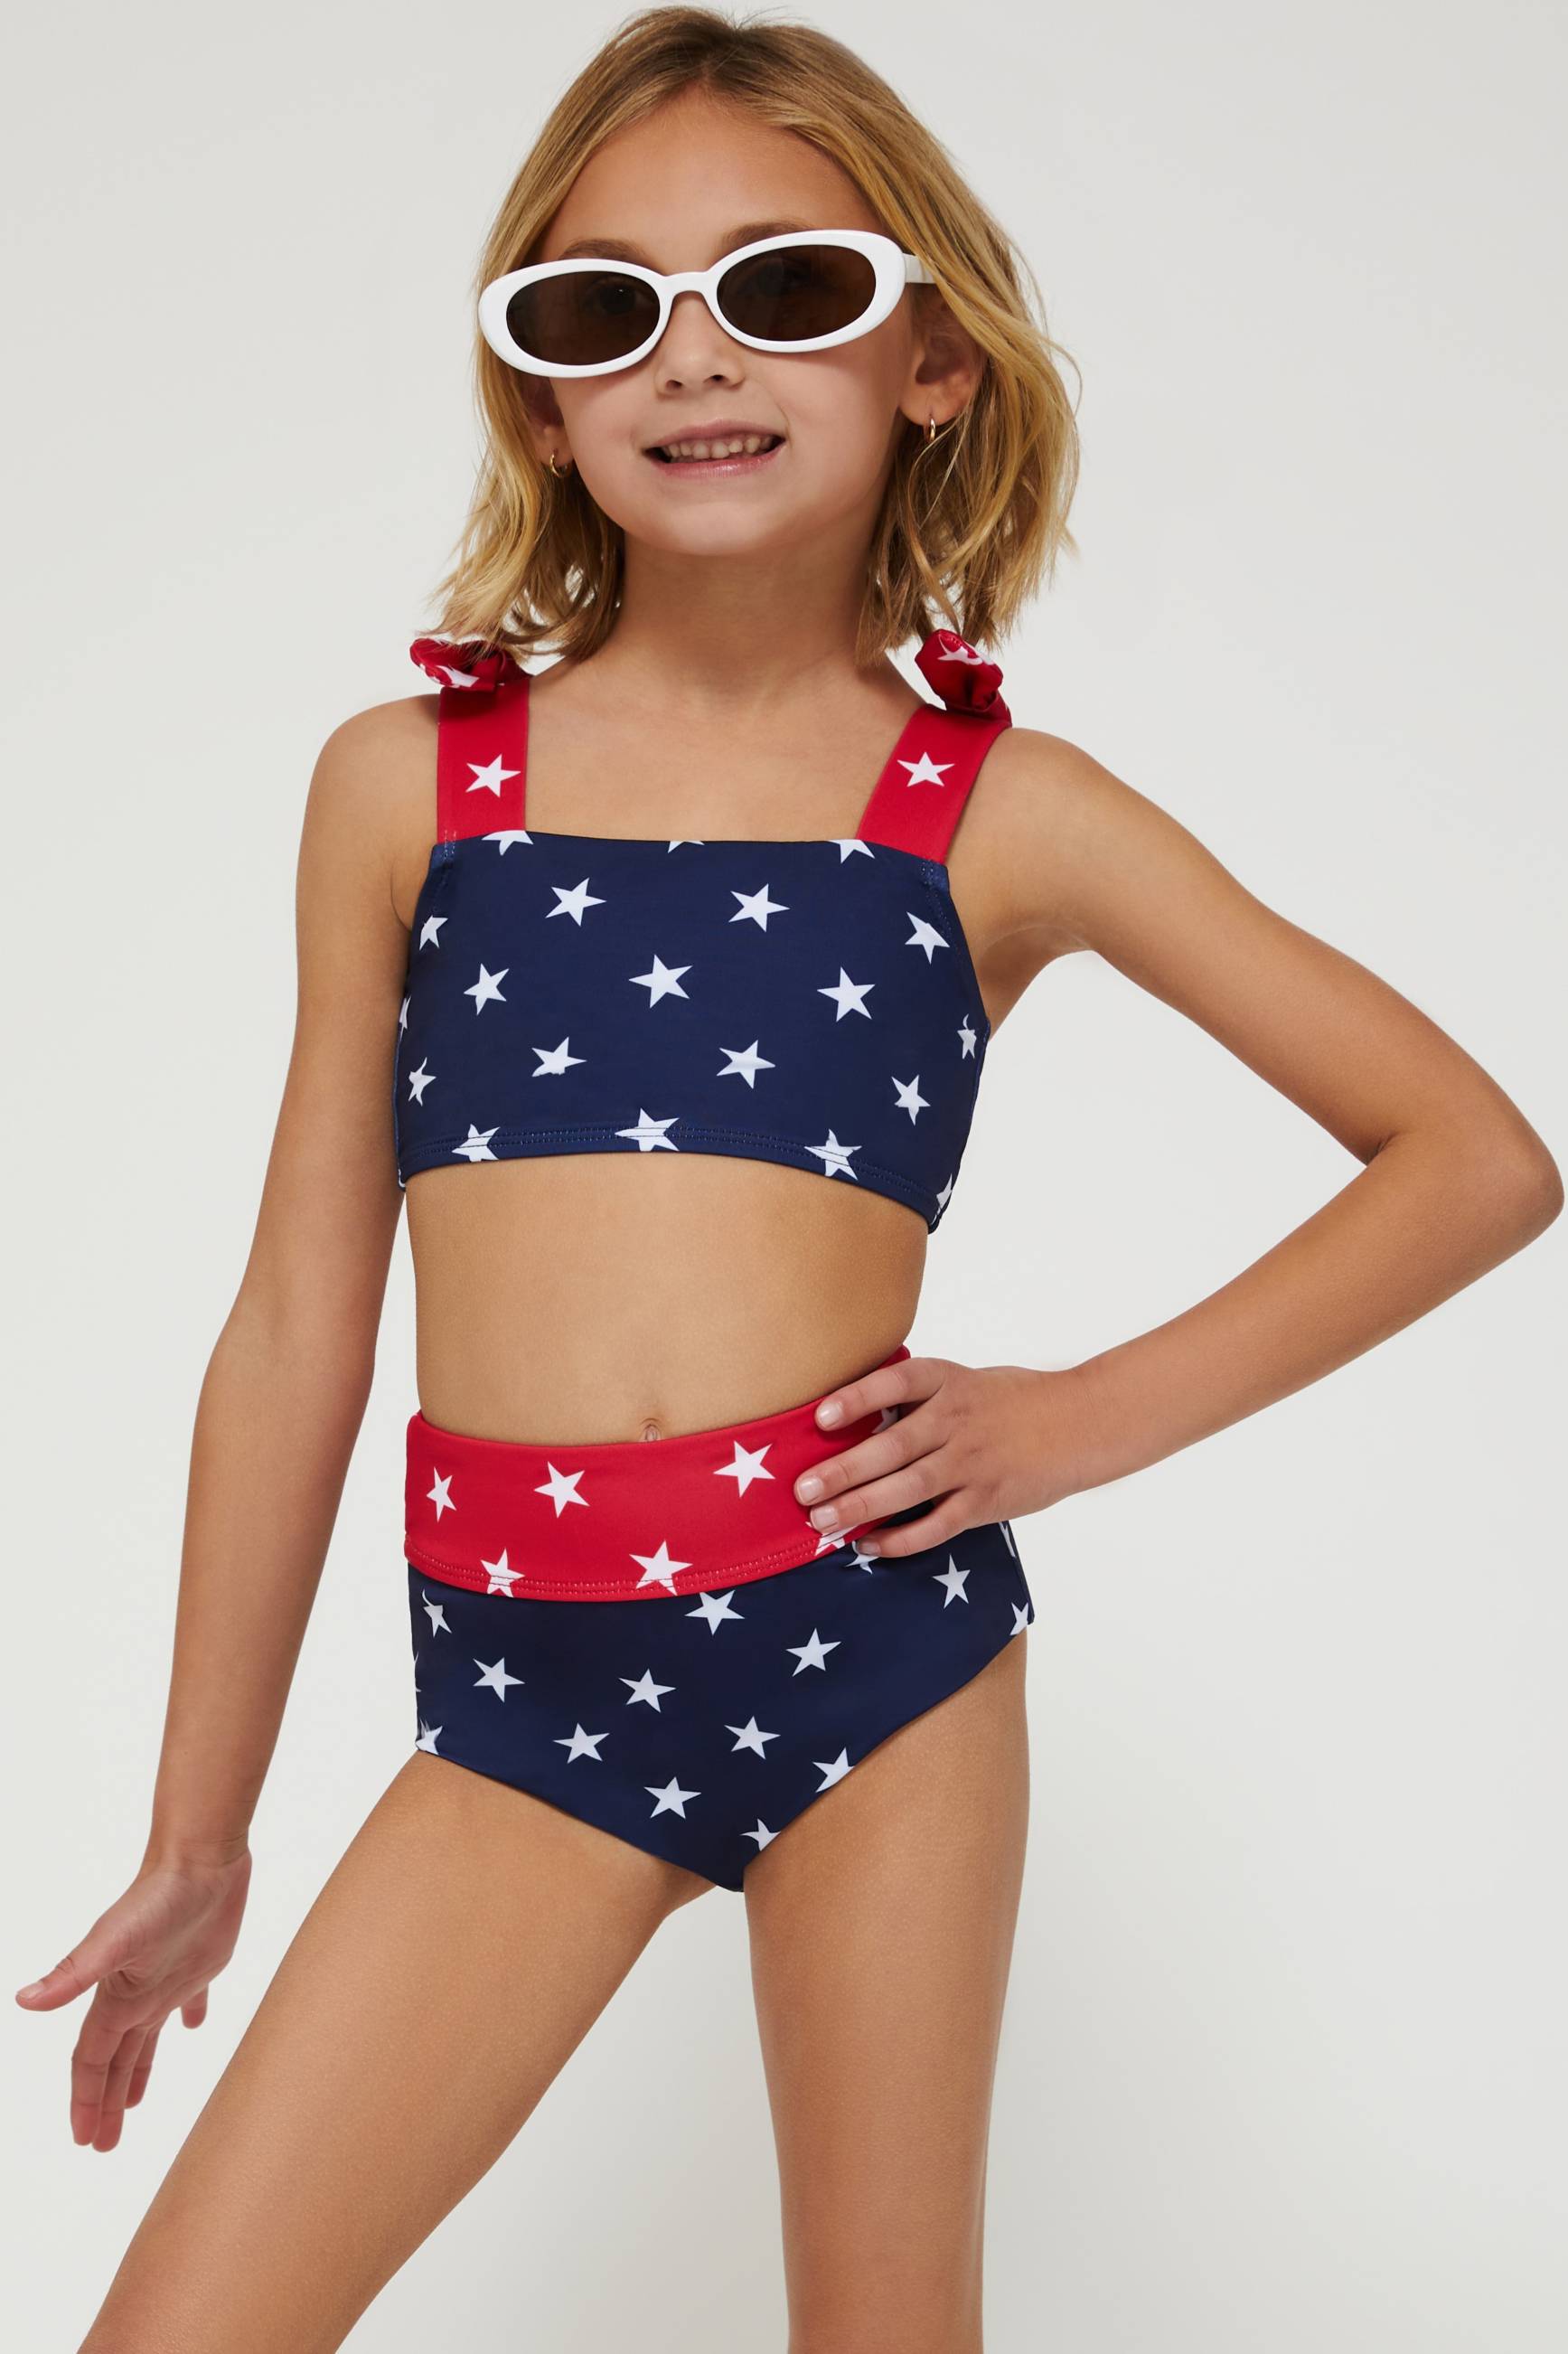 red and navy two piece swimsuit with stars for little girls